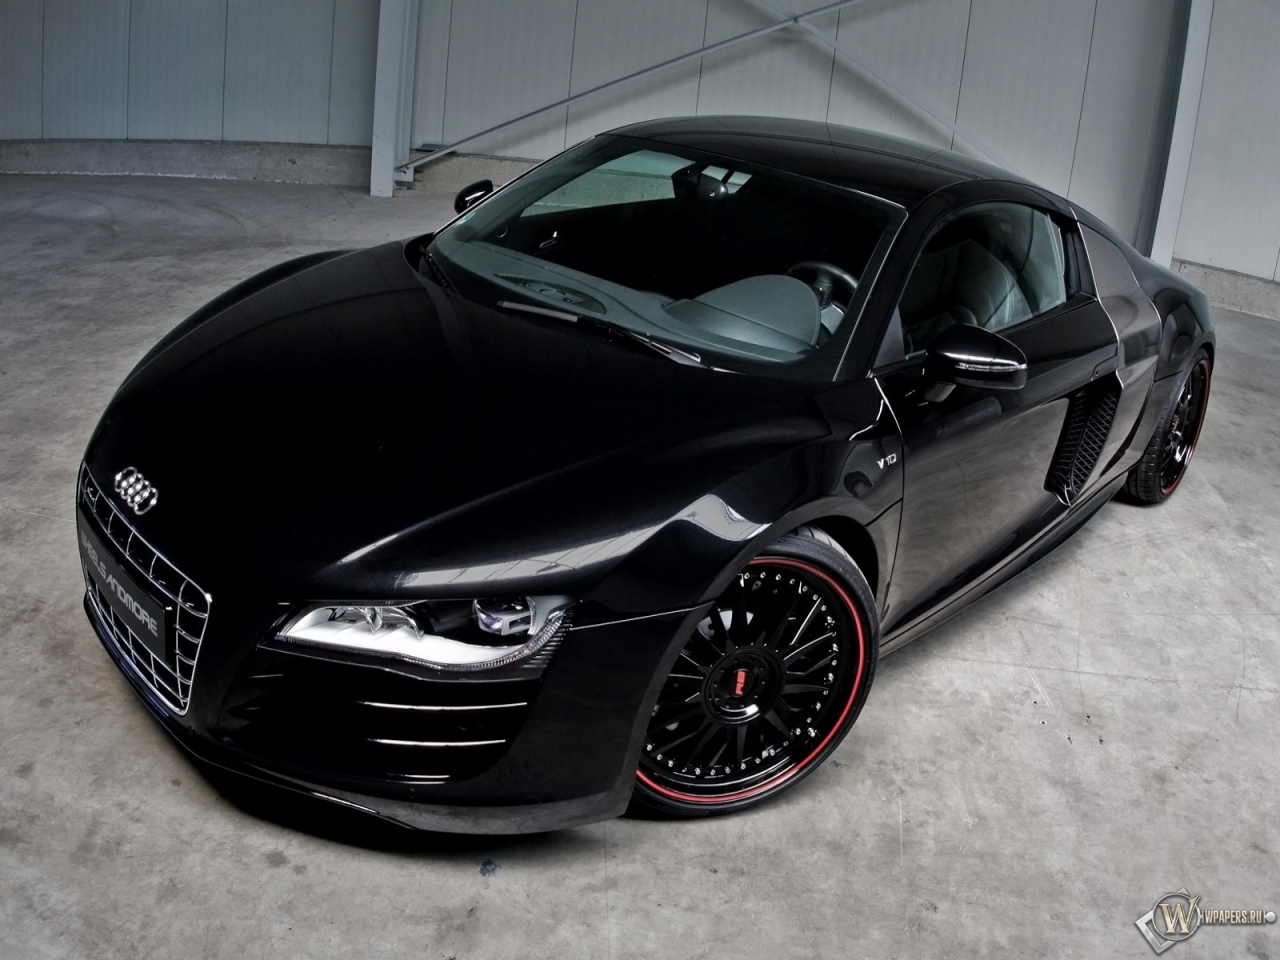 2011 Wheelsandmore Audi R8 V10 .6 - Front Angle Top 1280x960